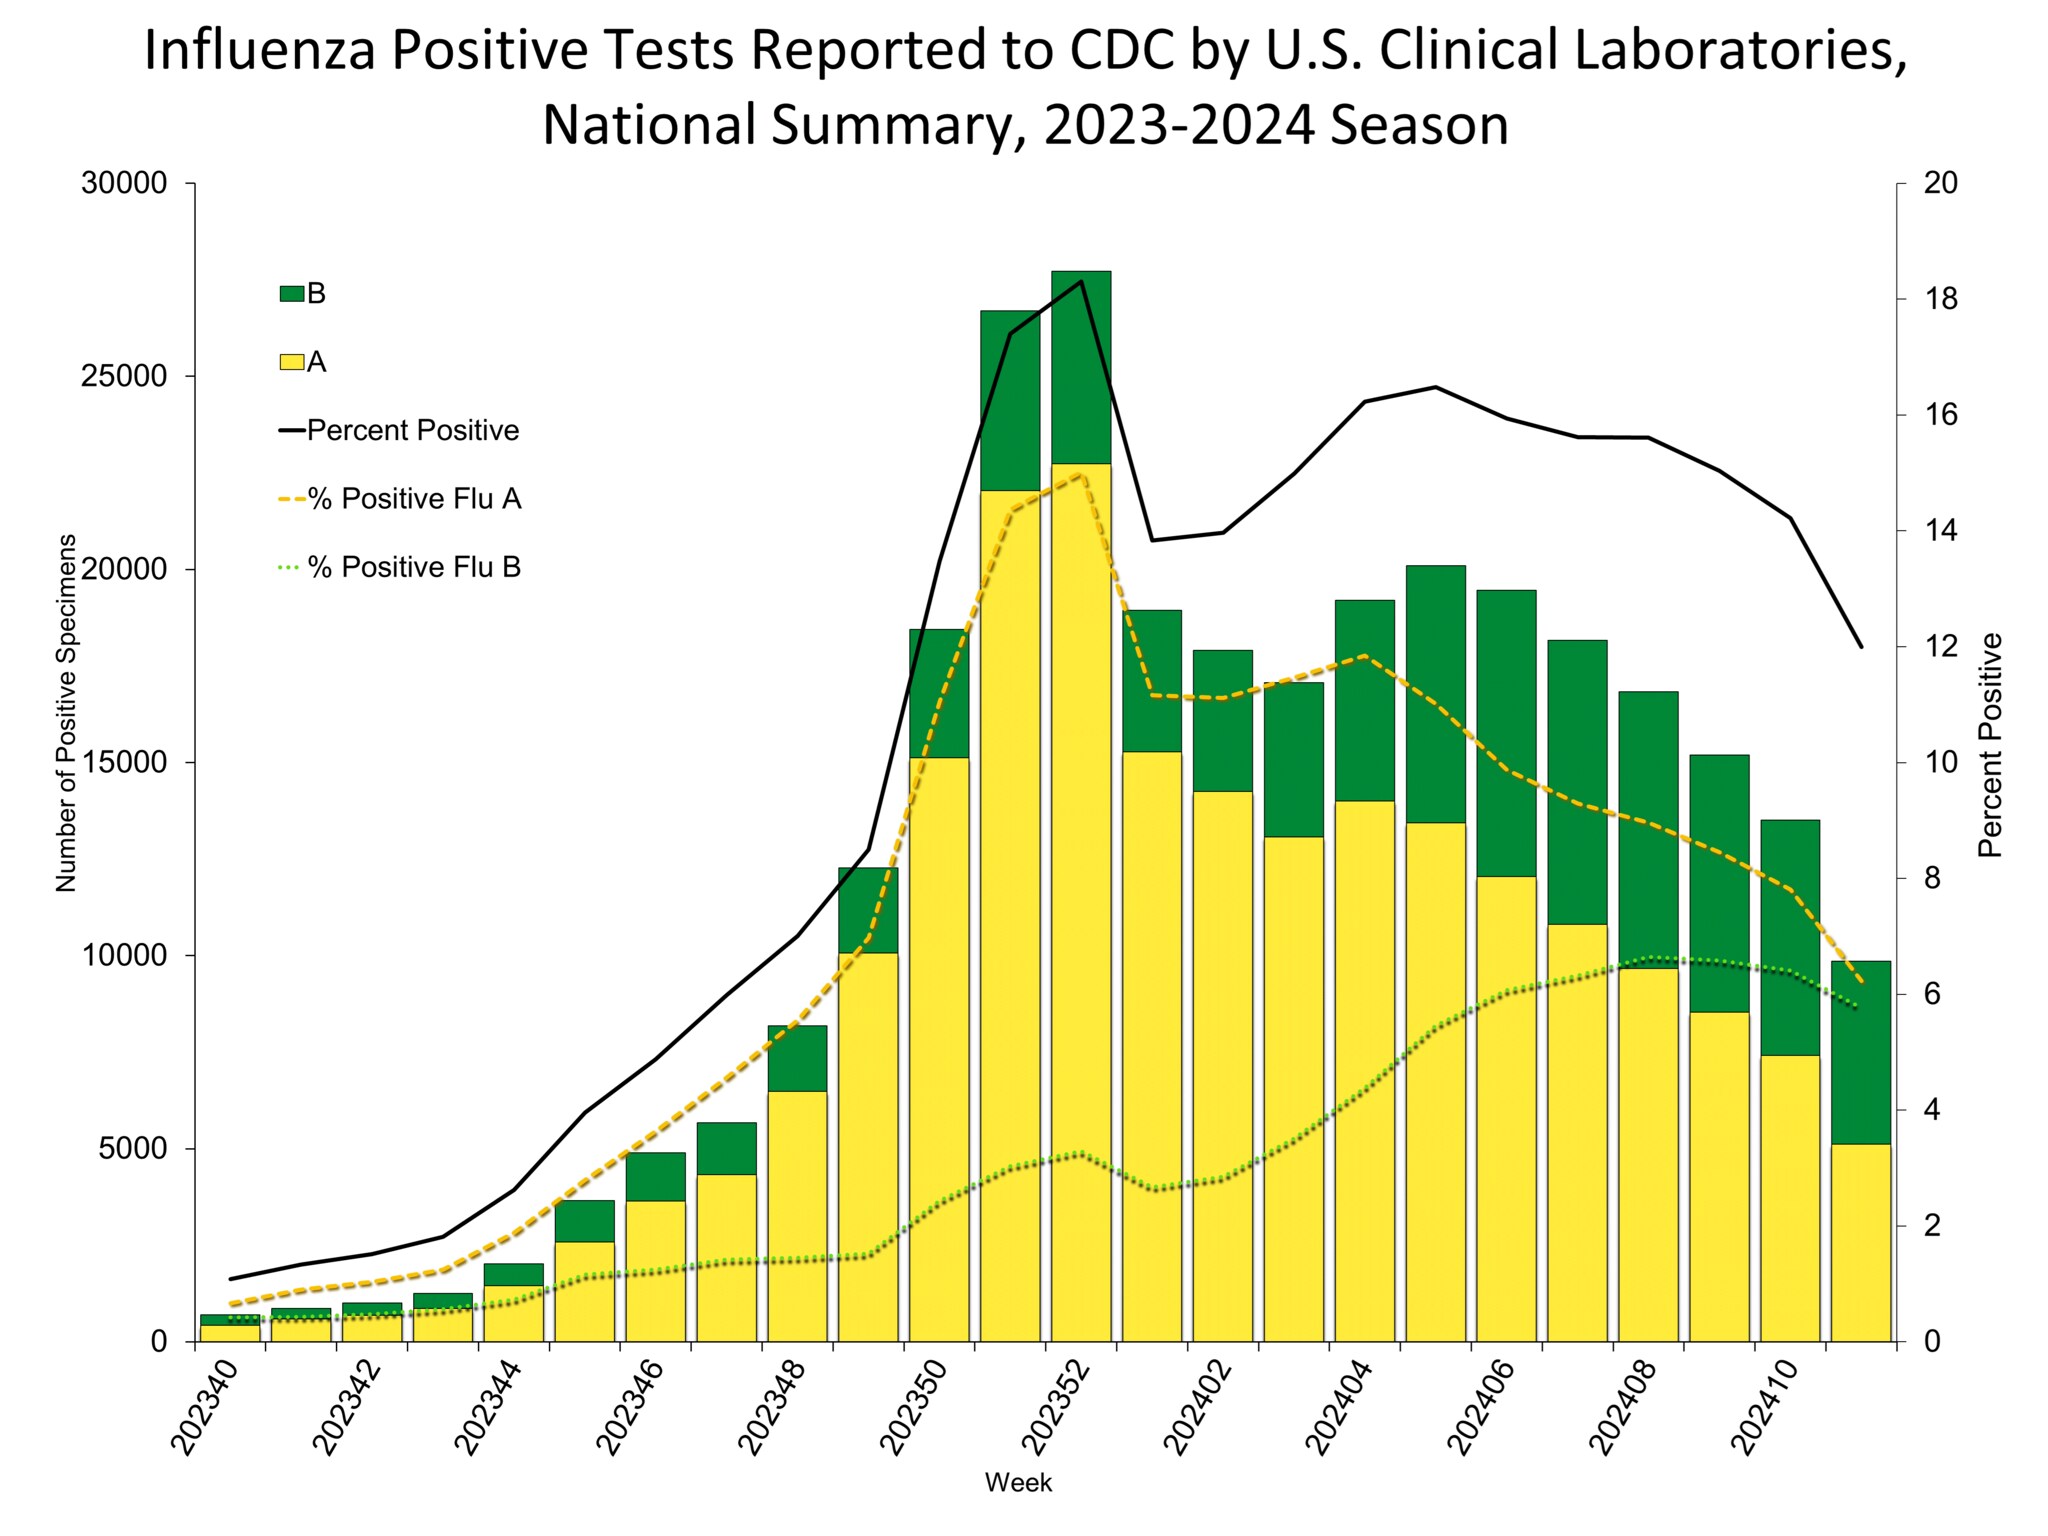 Influenza Positive Tests Reported to CDC by US Clinical Laboratories